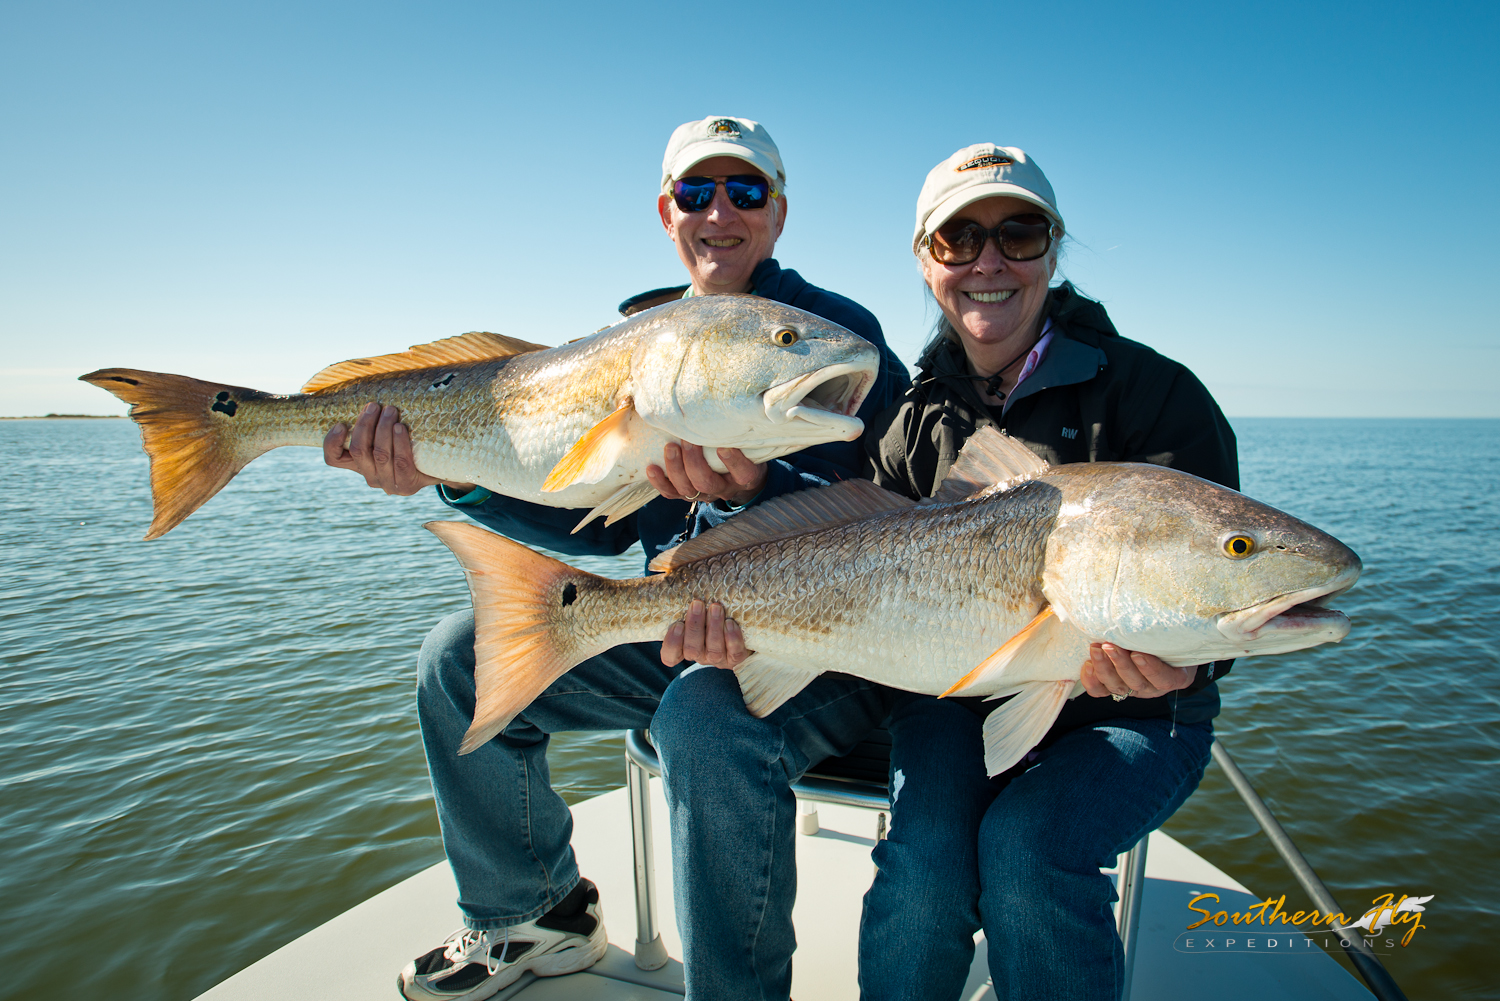 around what time of year is the best time to go fly fishing in new orleans southern fly expeditions 